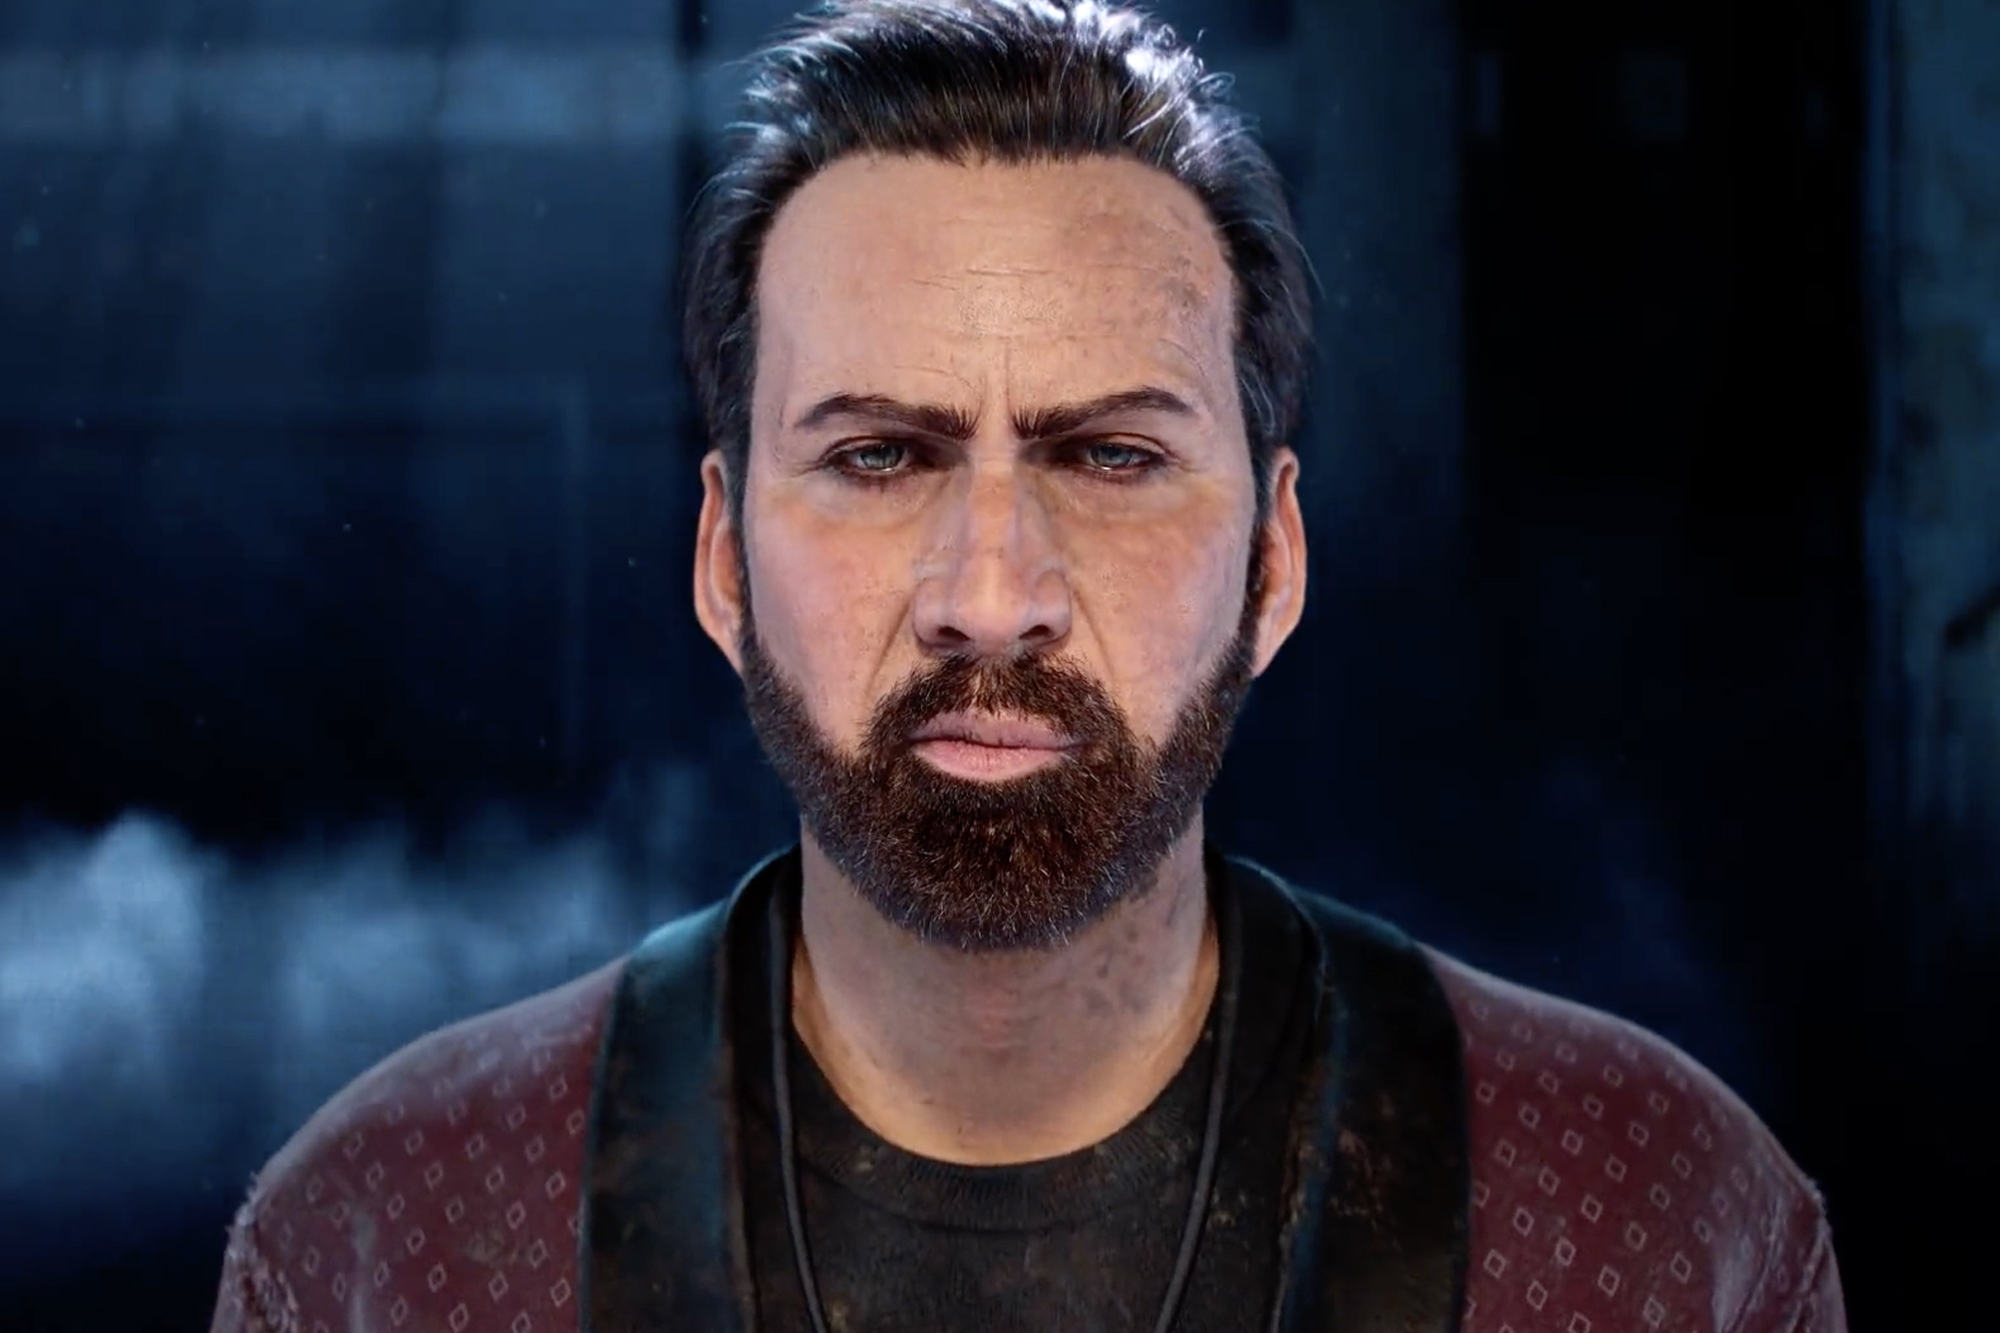 Nicolas Cage 'shakes the fabric of reality' by joining video game 'Dead by Daylight'